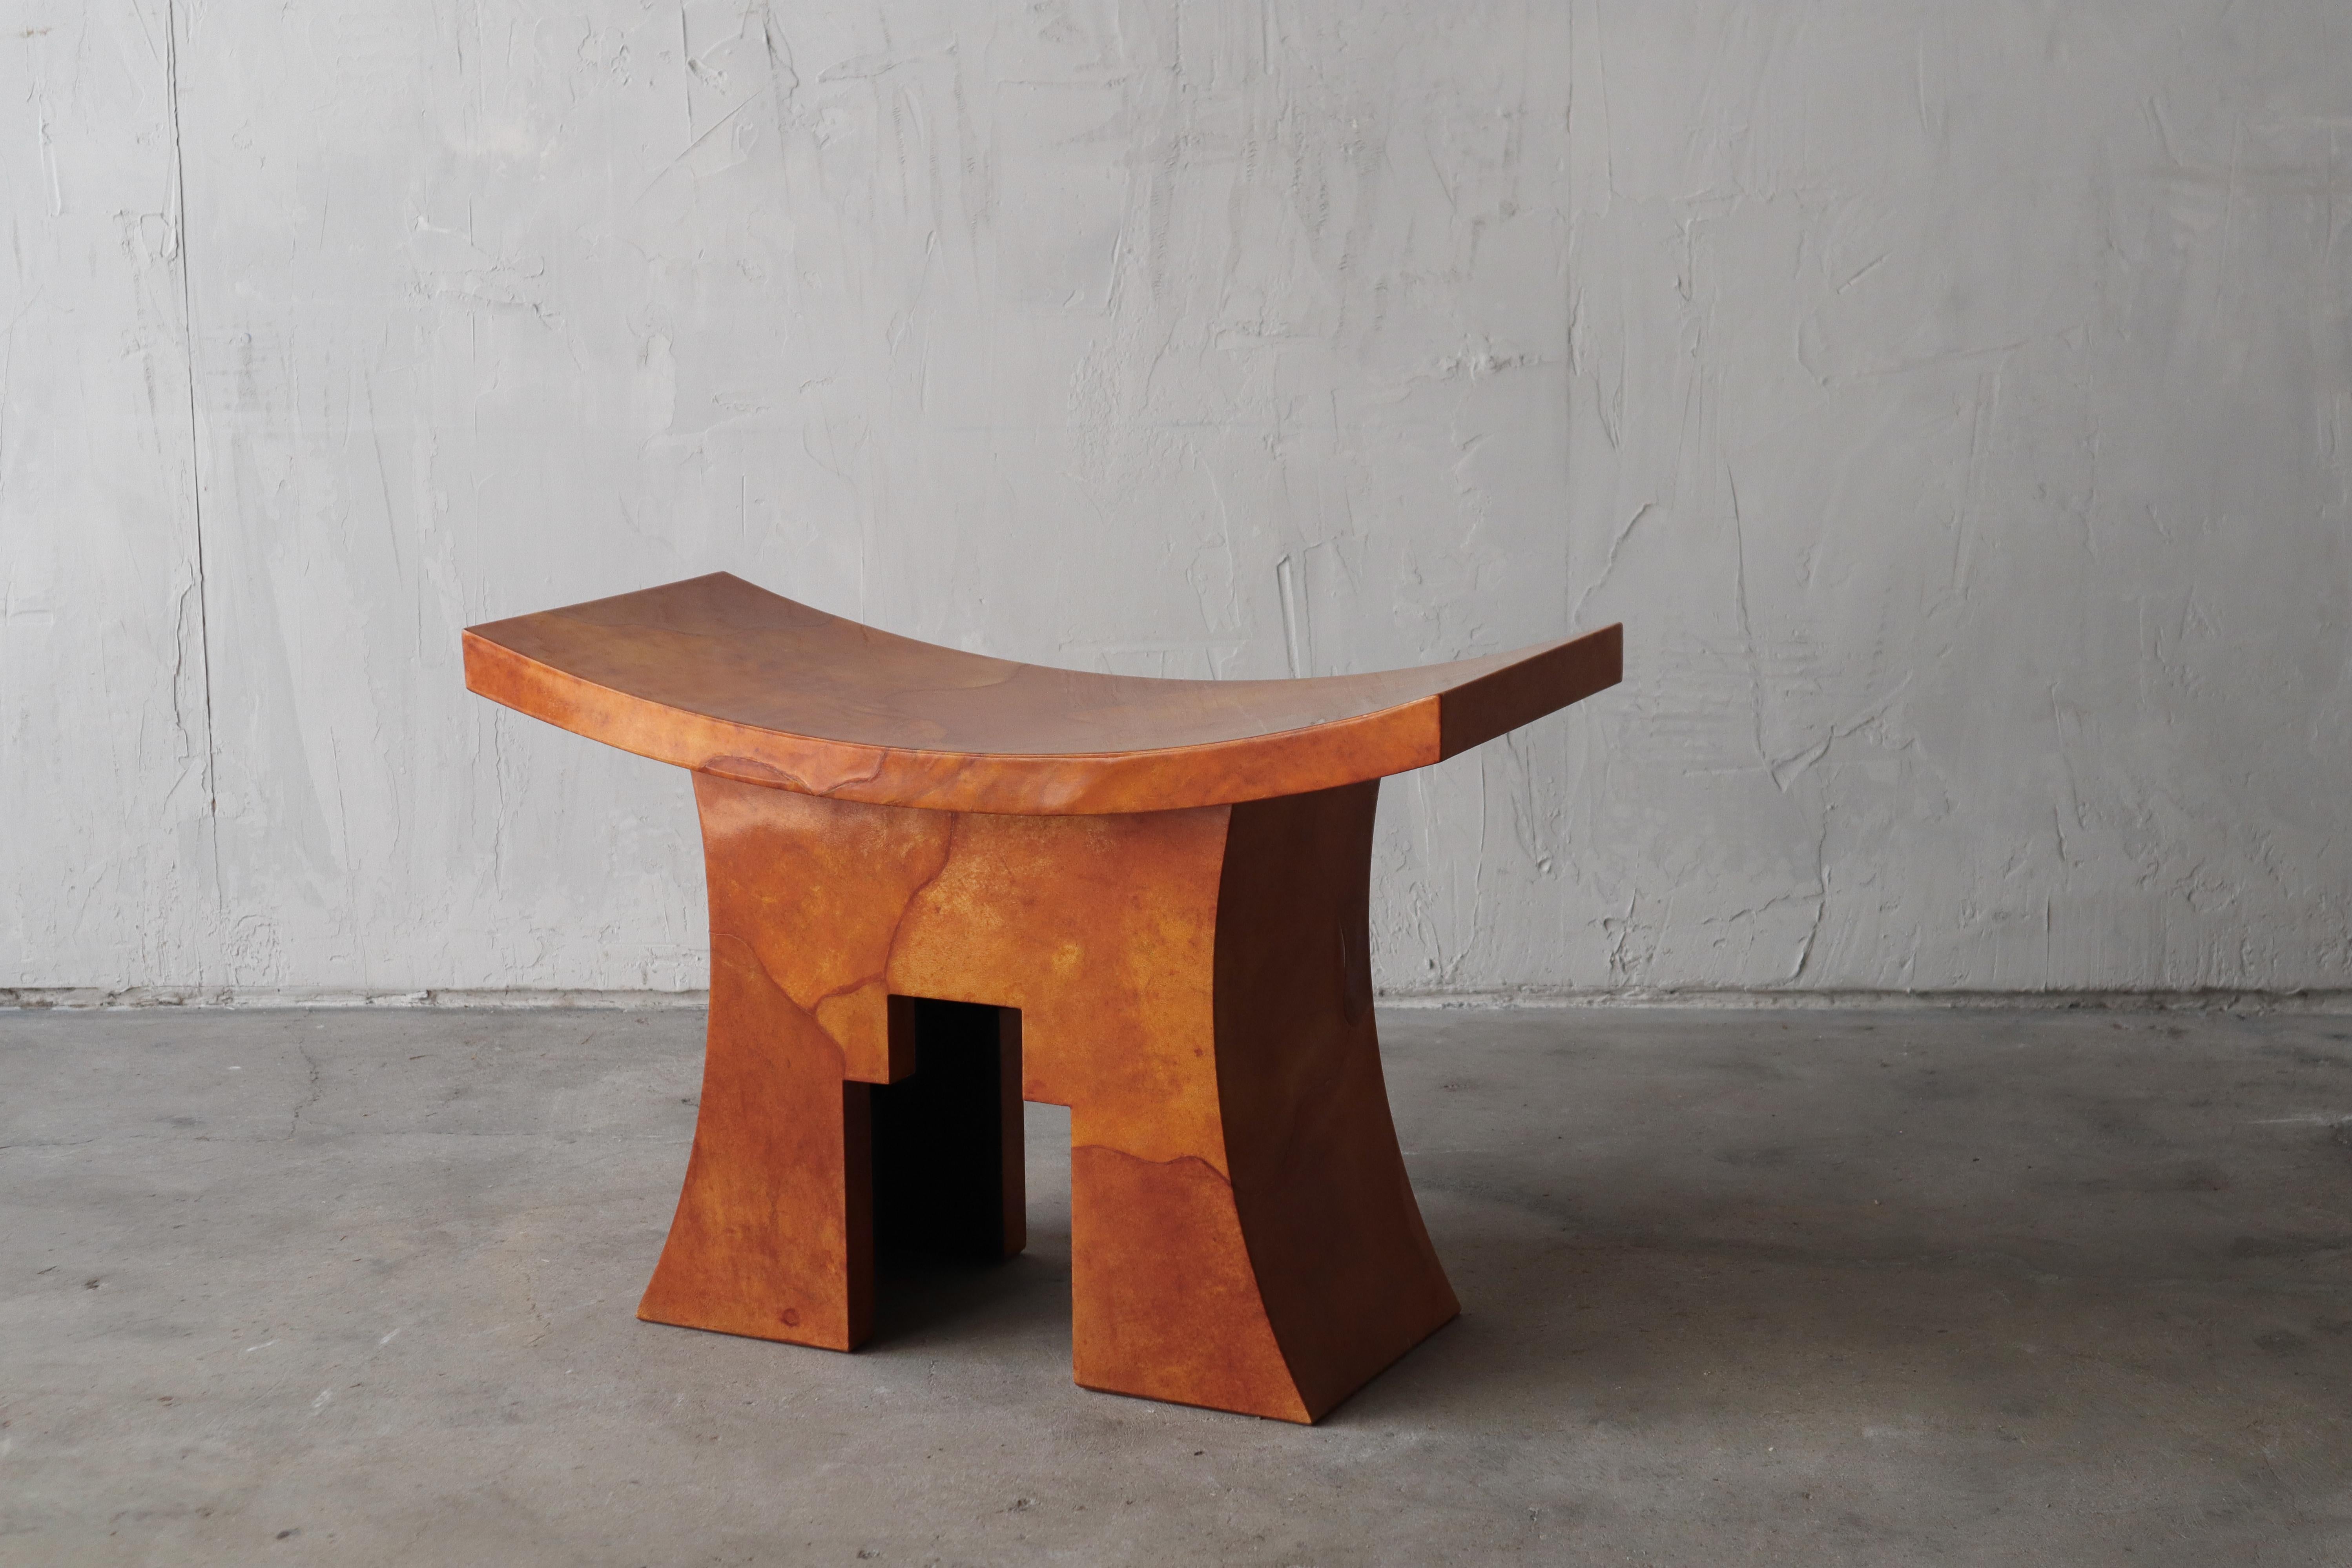 This rare original Karl Springer stool is amazing. The stool is lacquered goatskin, in a beautiful rusty orange color, this a design piece truly worth coveting.

The stool is in incredible condition. There are only a couple small flaws in the